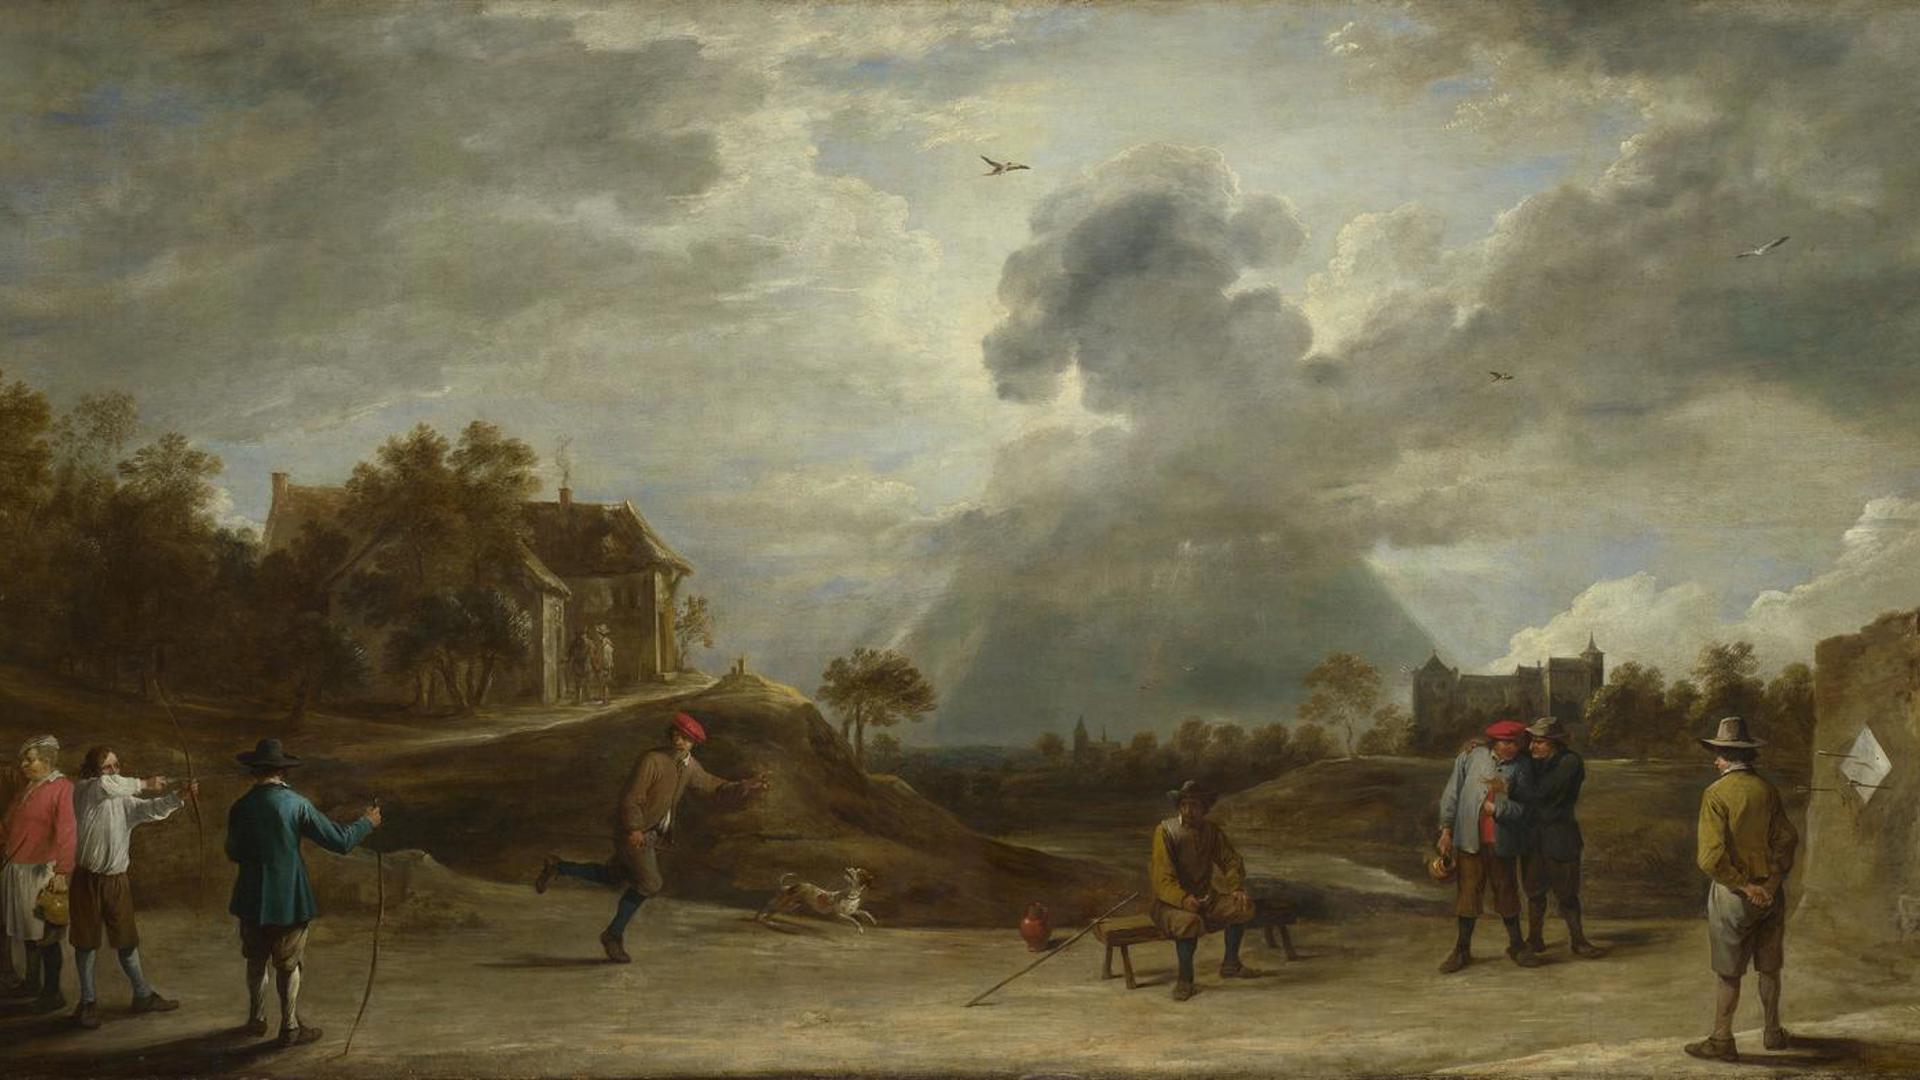 Peasants at Archery by David Teniers the Younger